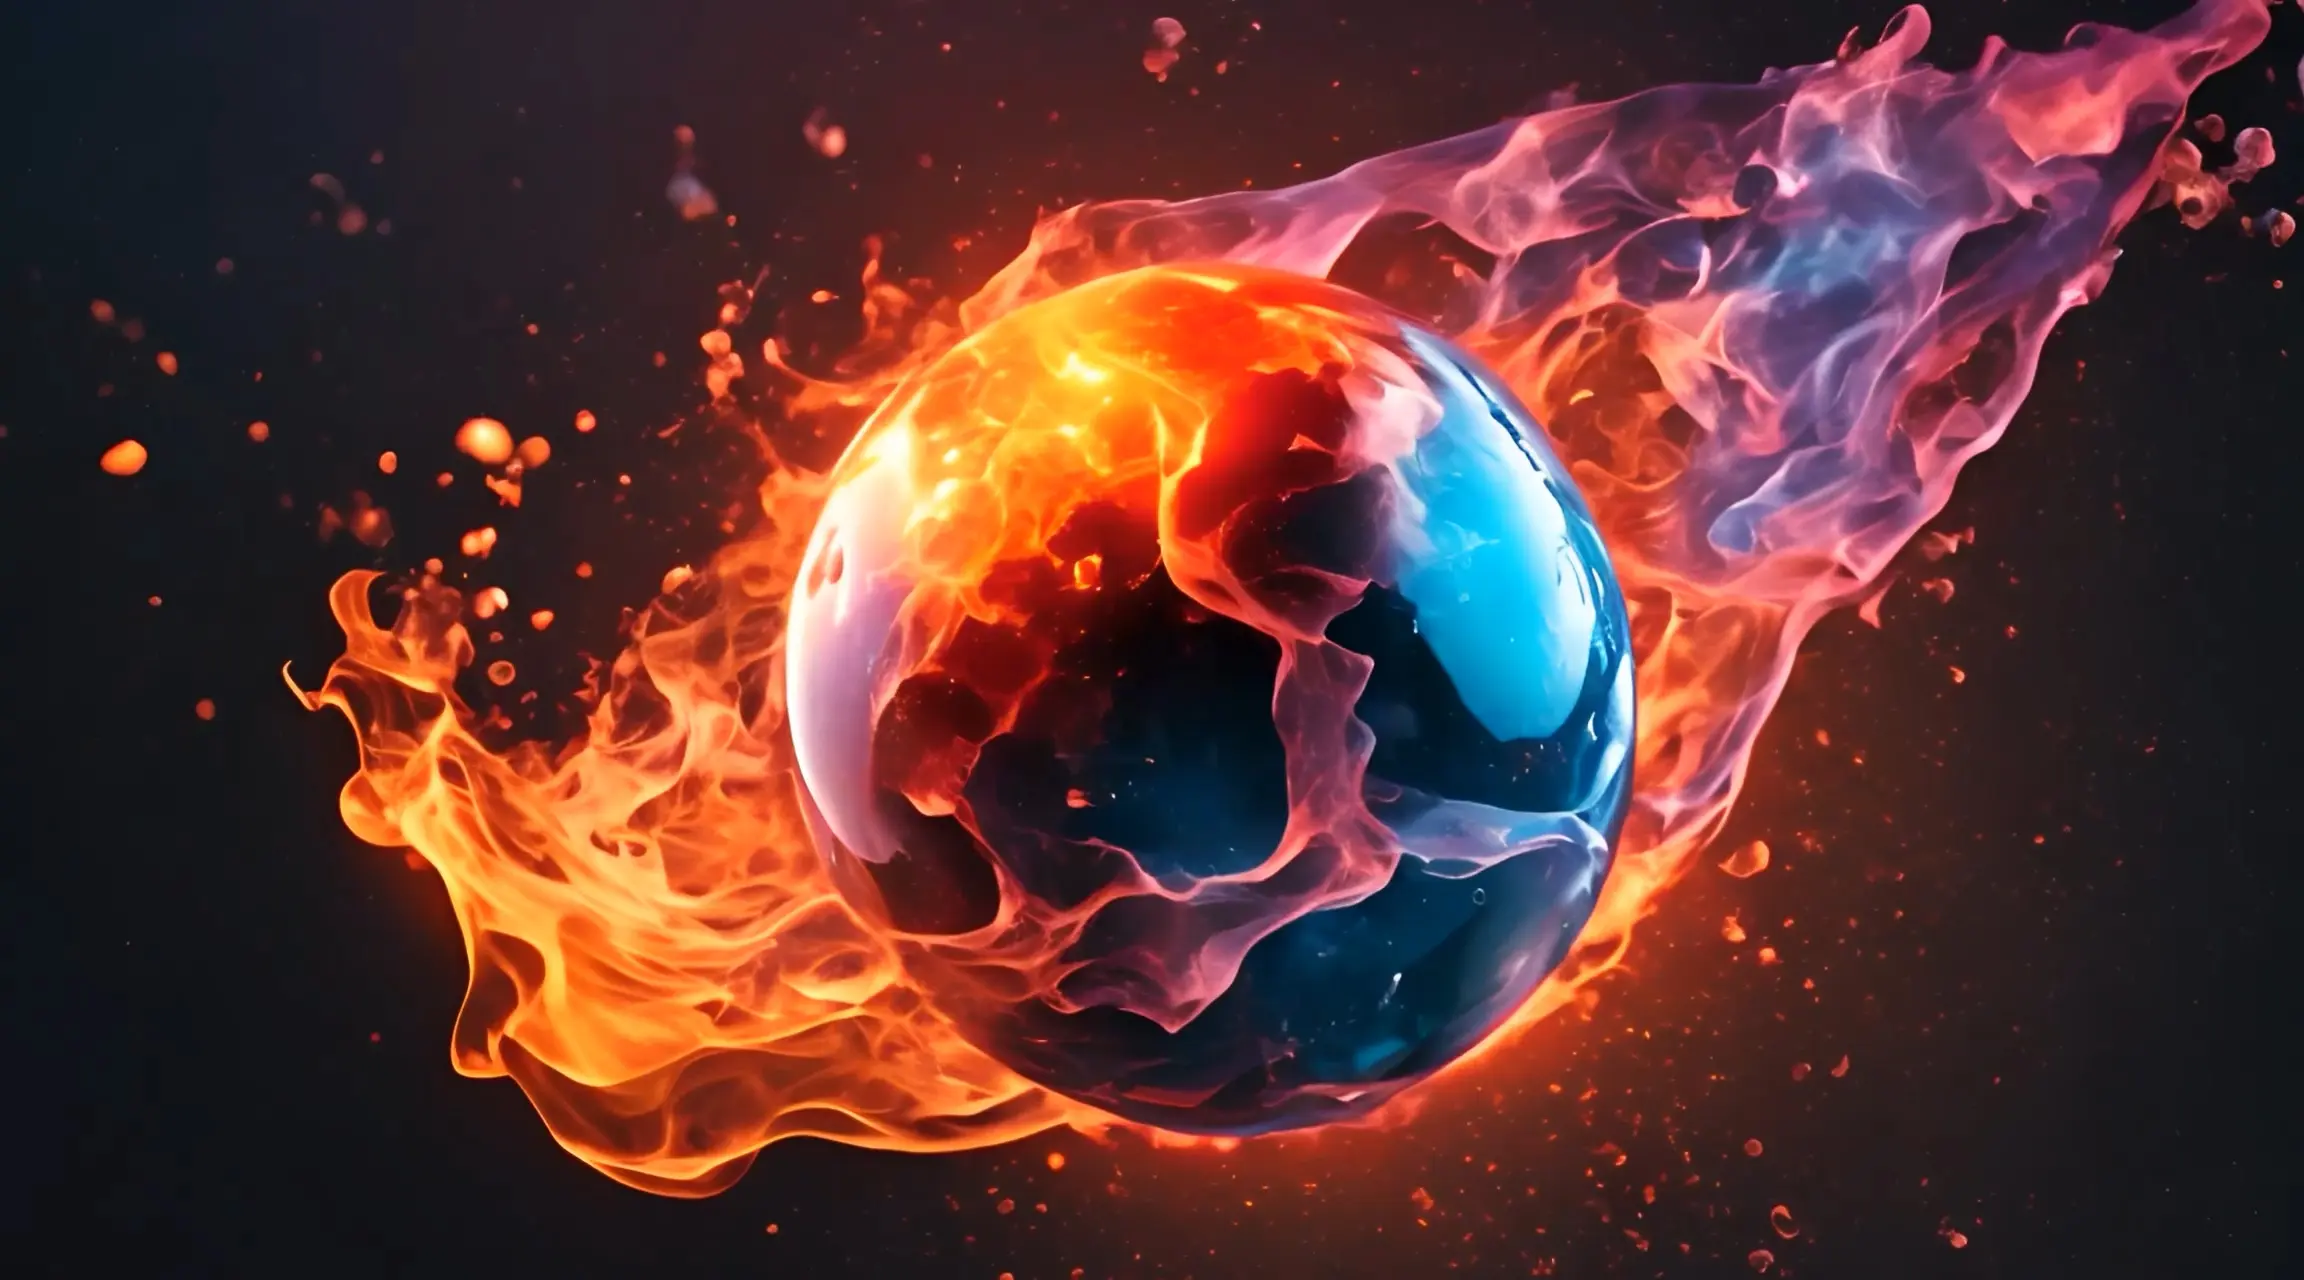 Soccer Ball Elemental Clash Dynamic Water and Fire